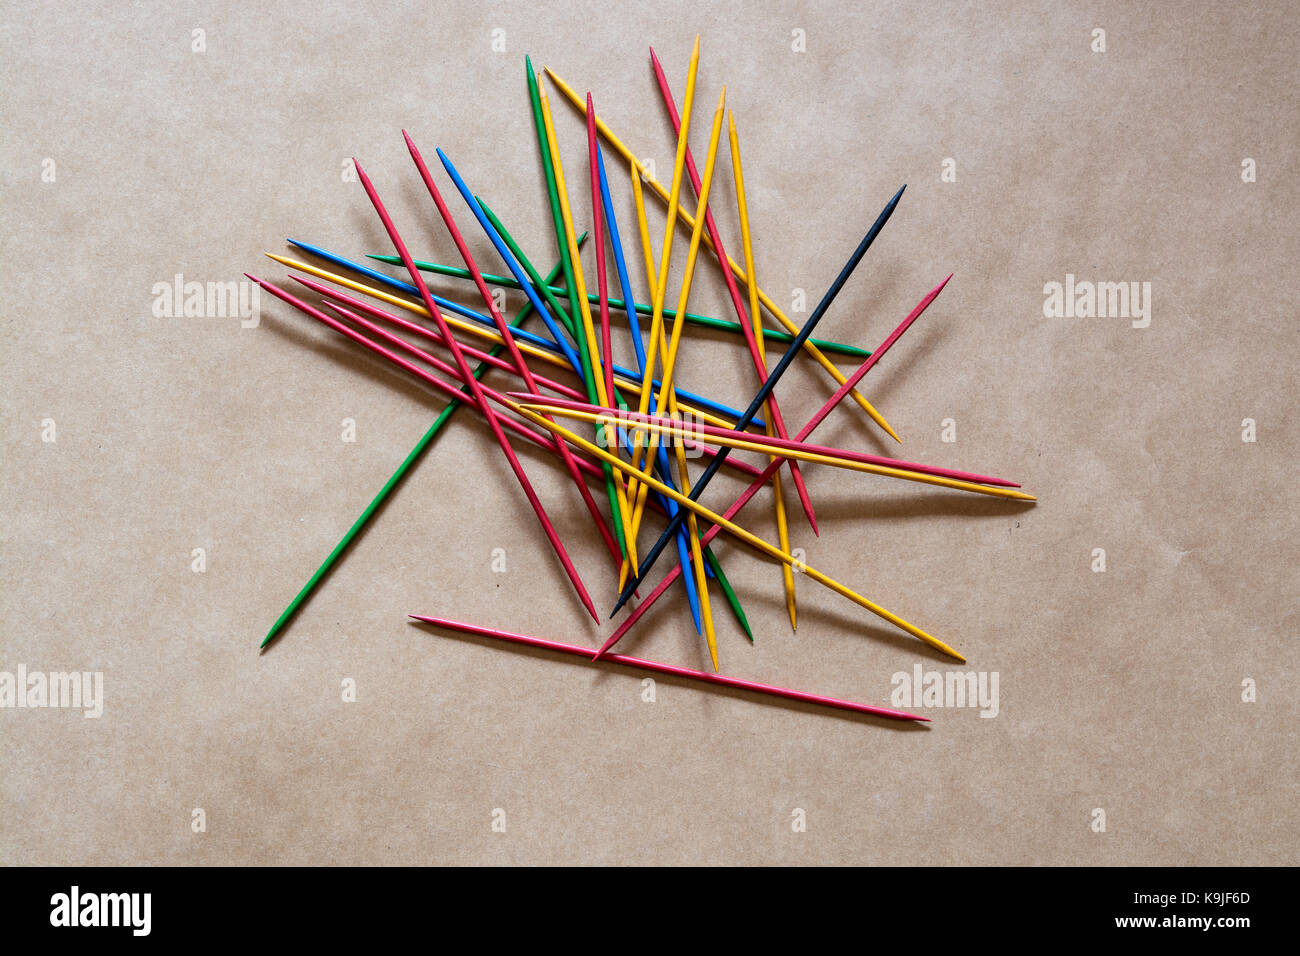 Pick up Sticks - a random pile of coloured wooden sticks with sharp points. On a brown background. Can be a puzzle or a competition. Stock Photo